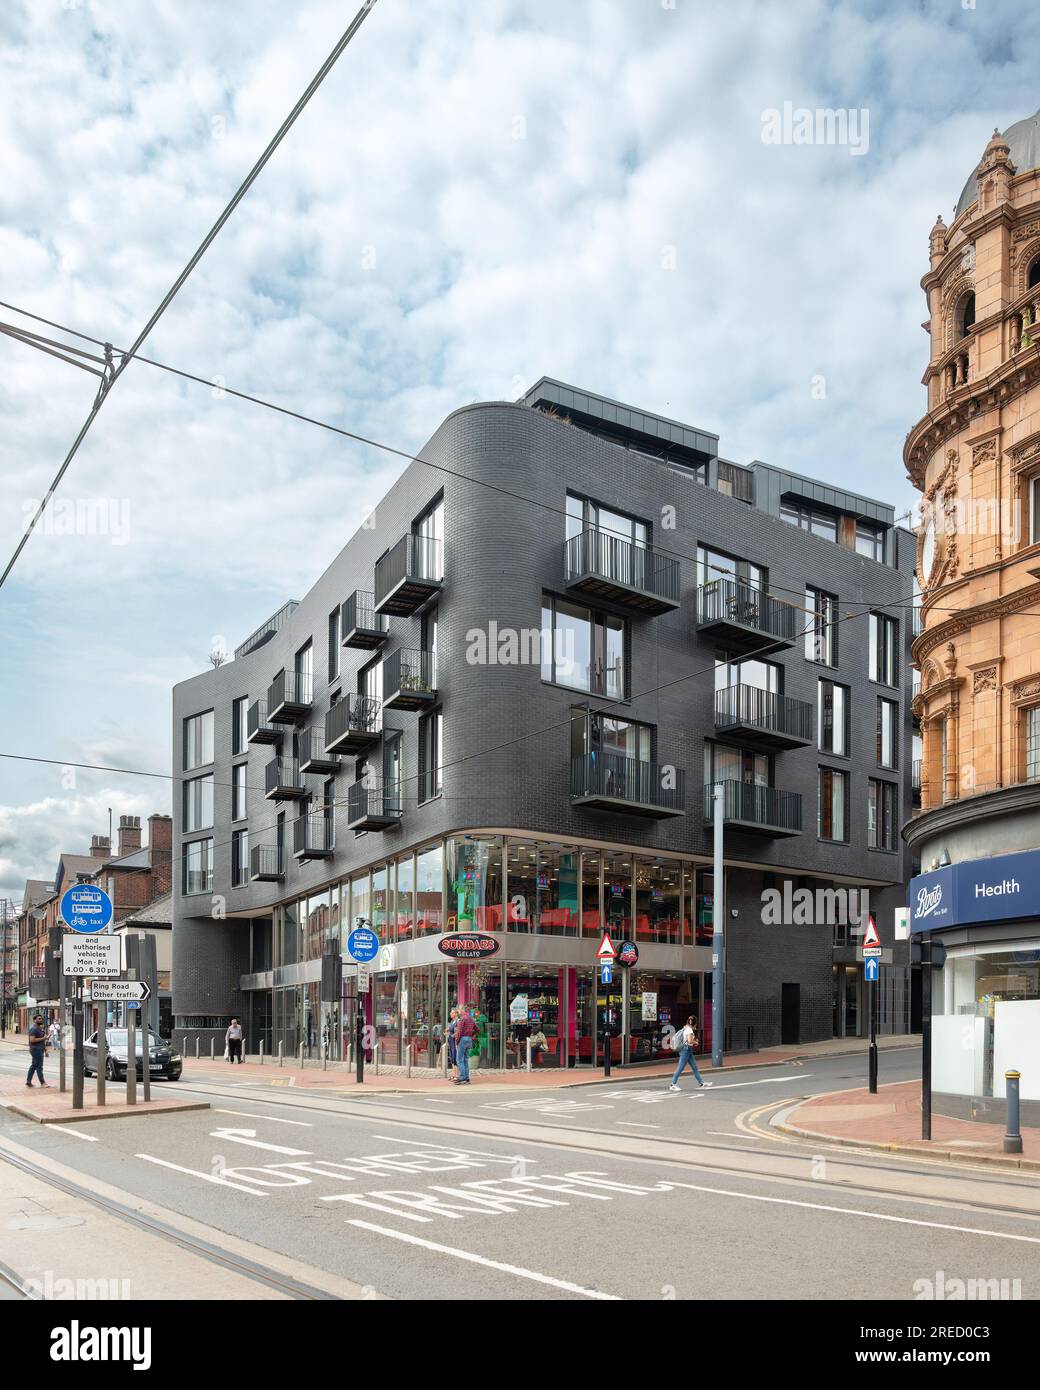 Sheffield, England - Sinclair building / 266 Glossop Road mixed use building by Project Orange Stock Photo